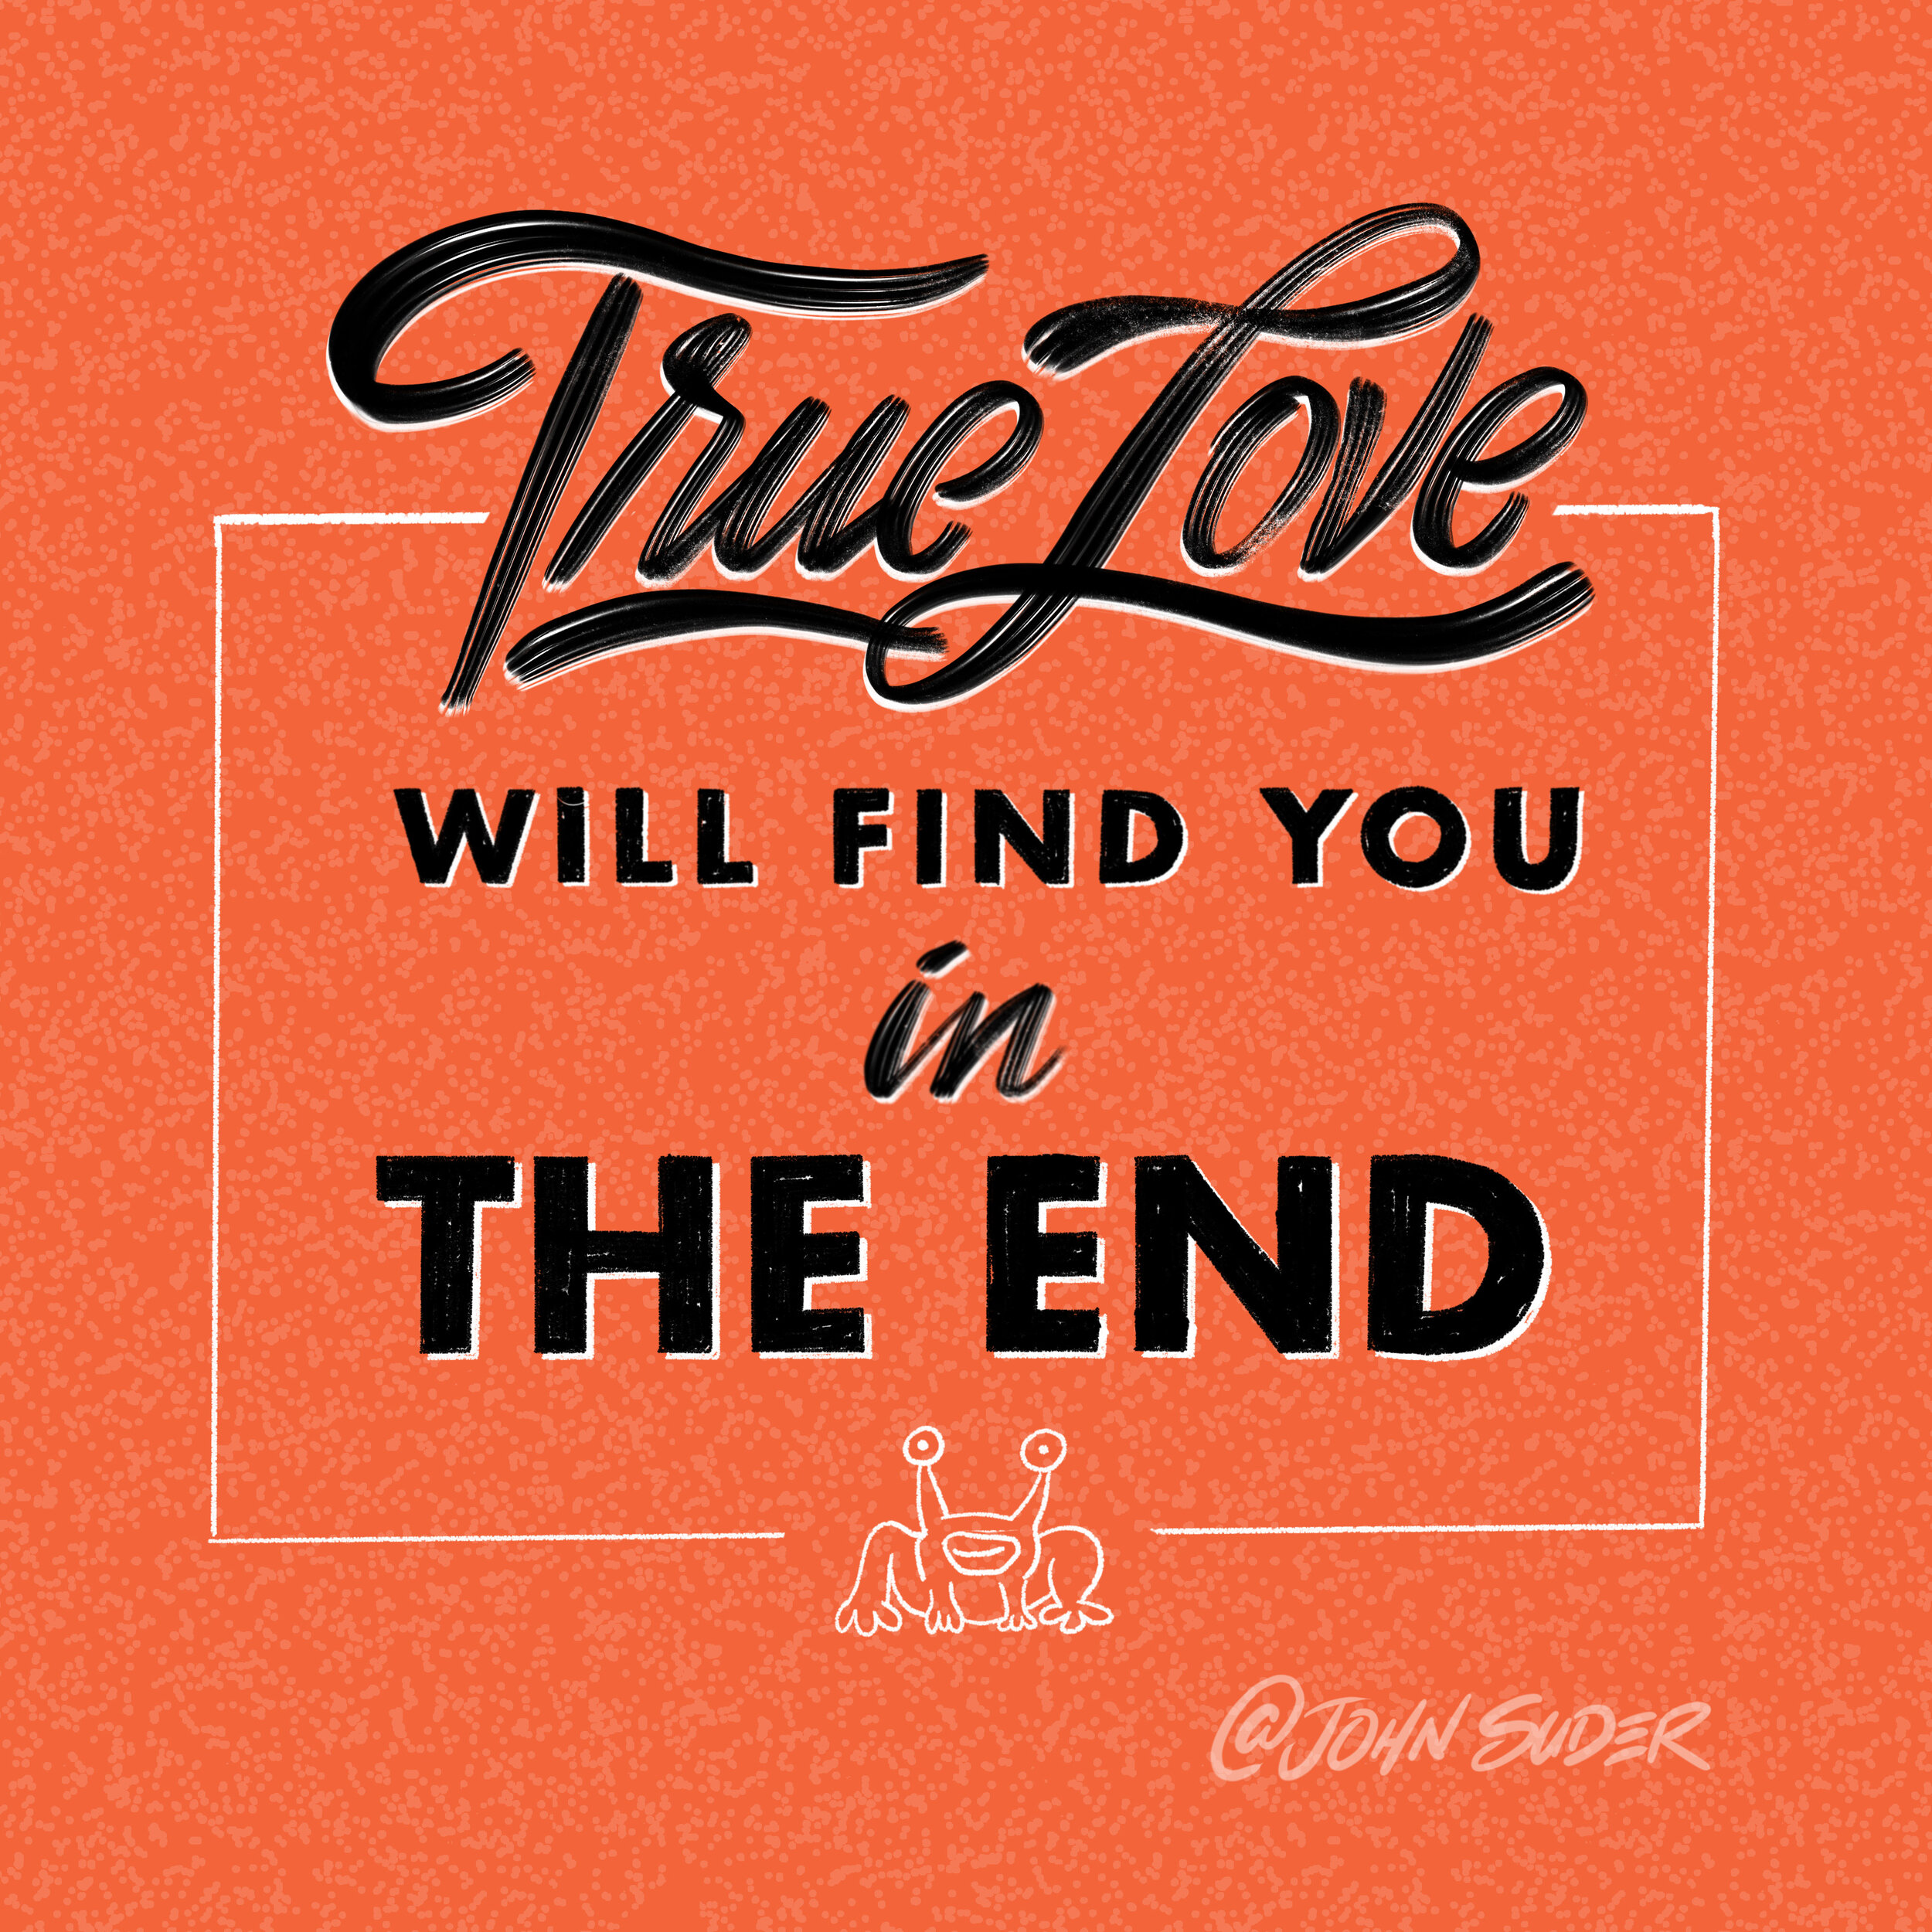 True Love Will Find You In The End